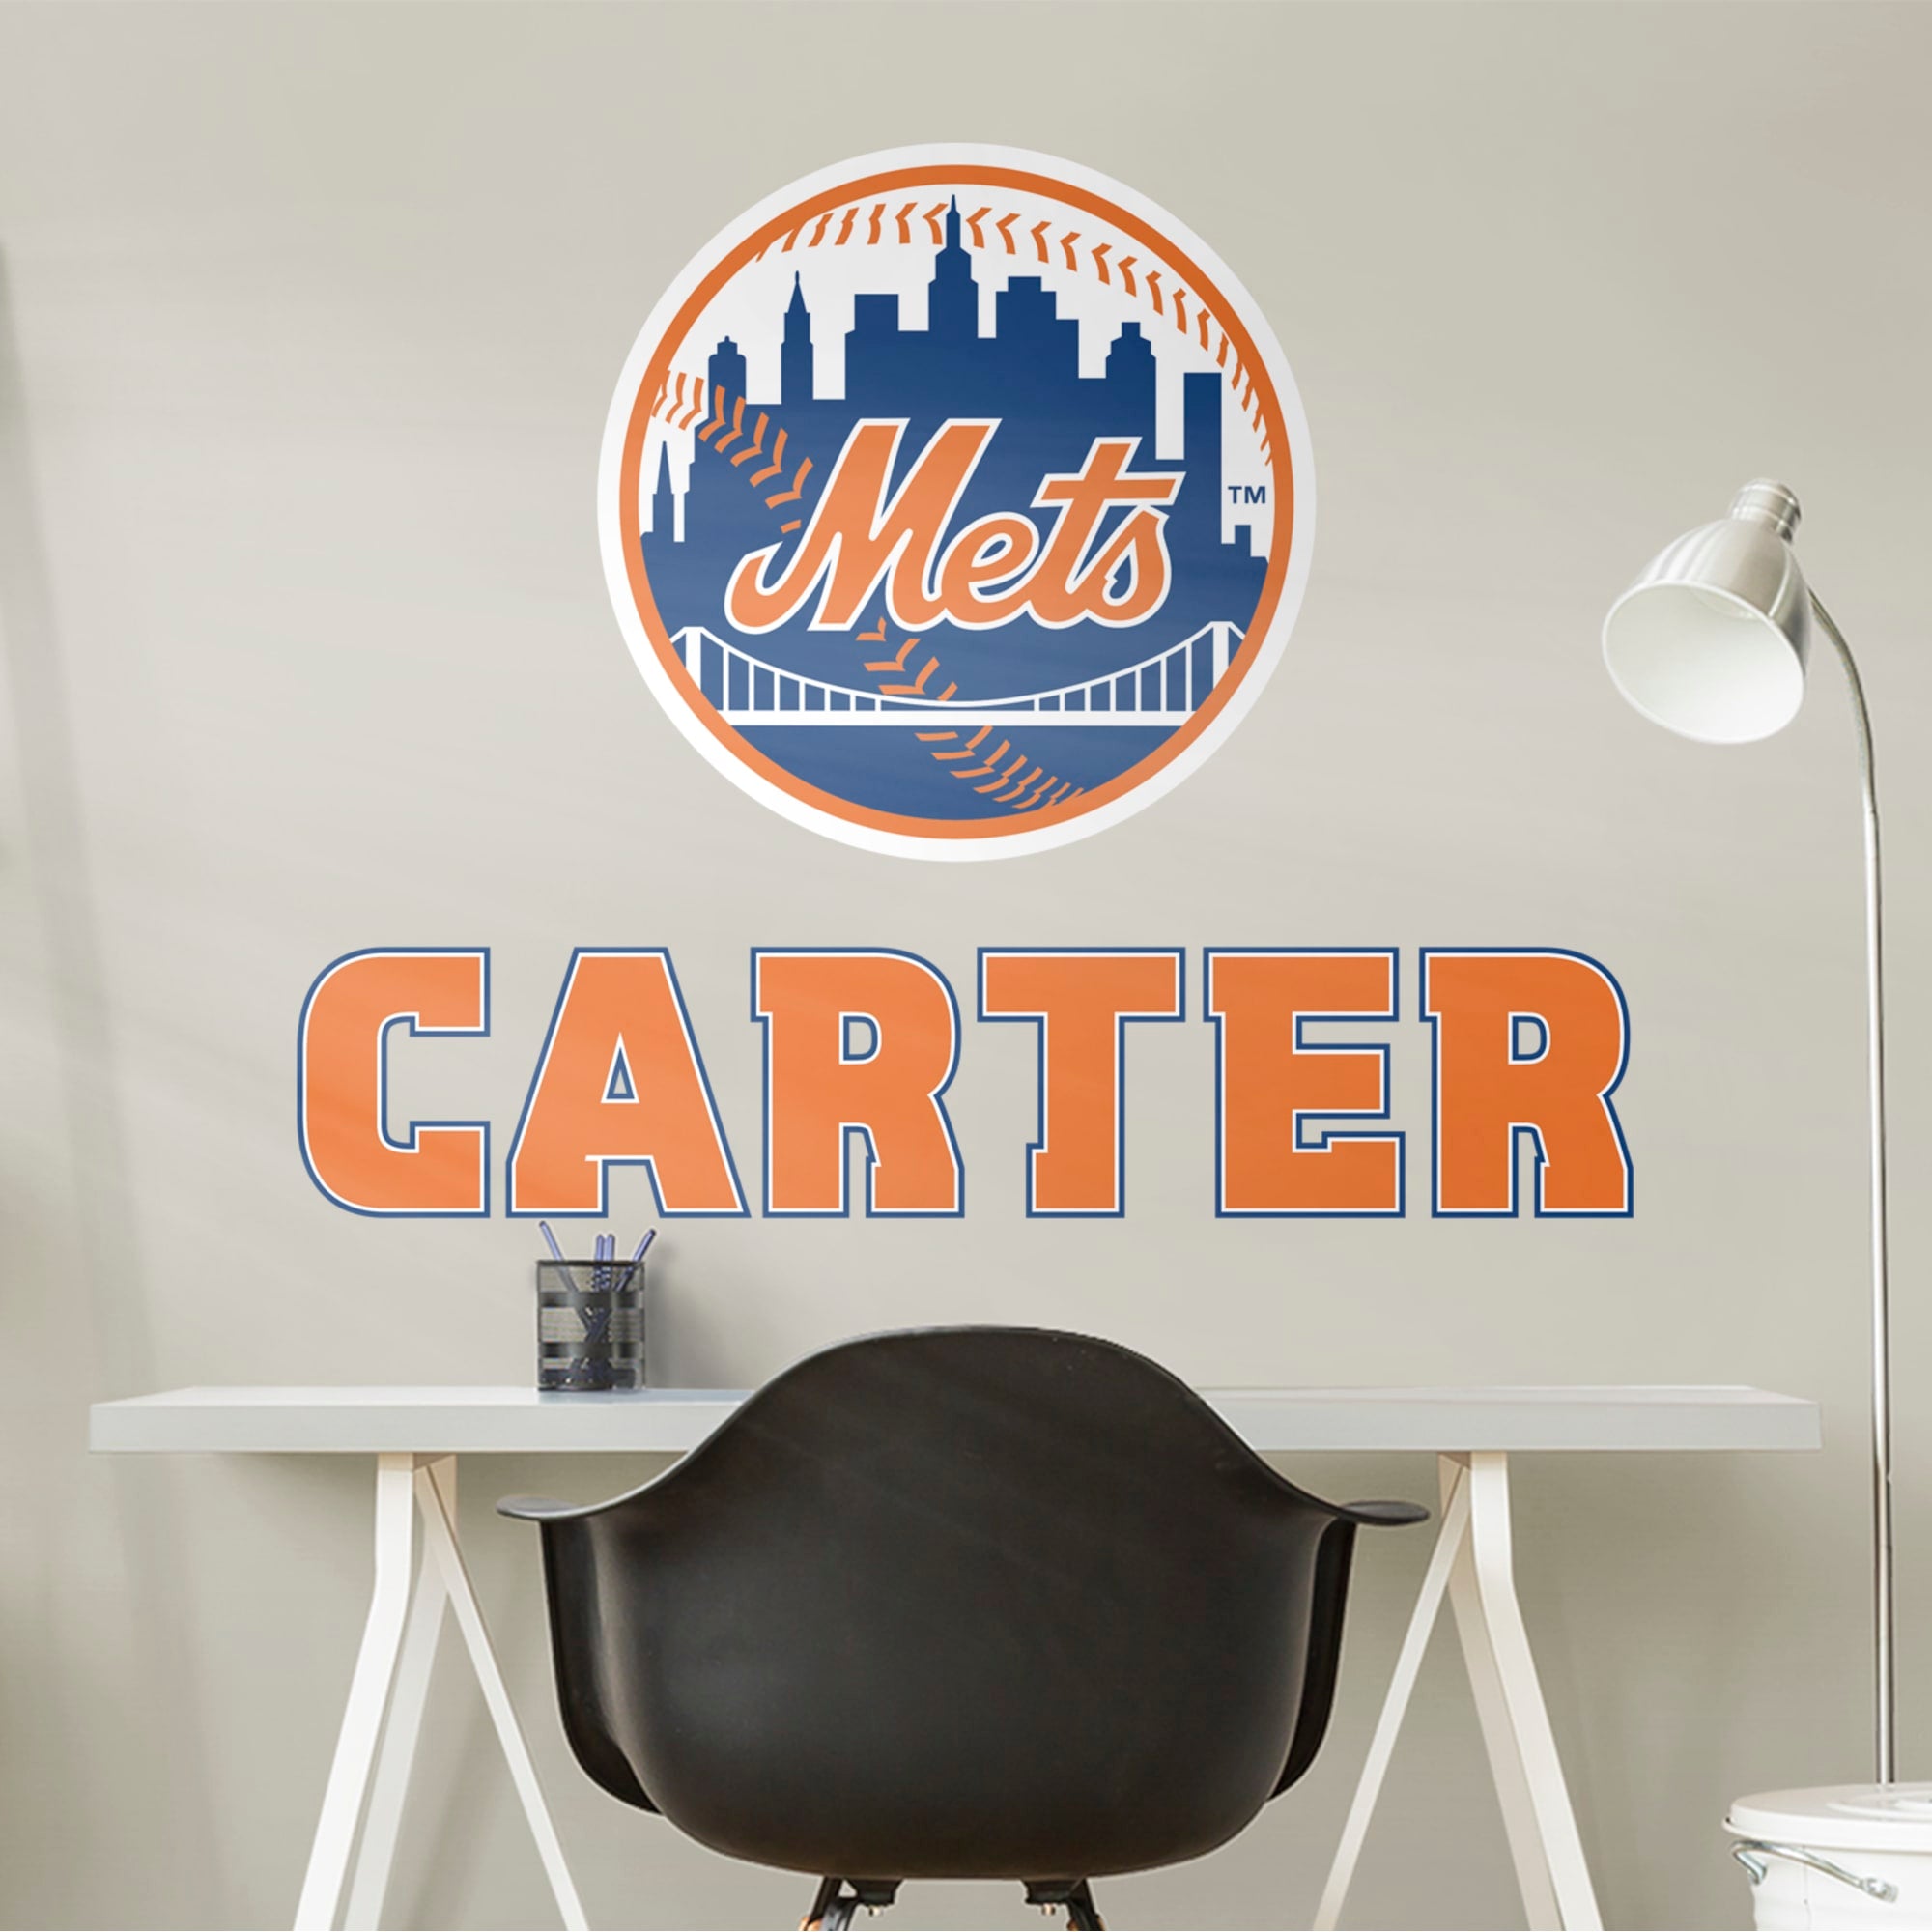 New York Mets: Stacked Personalized Name - Officially Licensed MLB Transfer Decal in Orange (52"W x 39.5"H) by Fathead | Vinyl